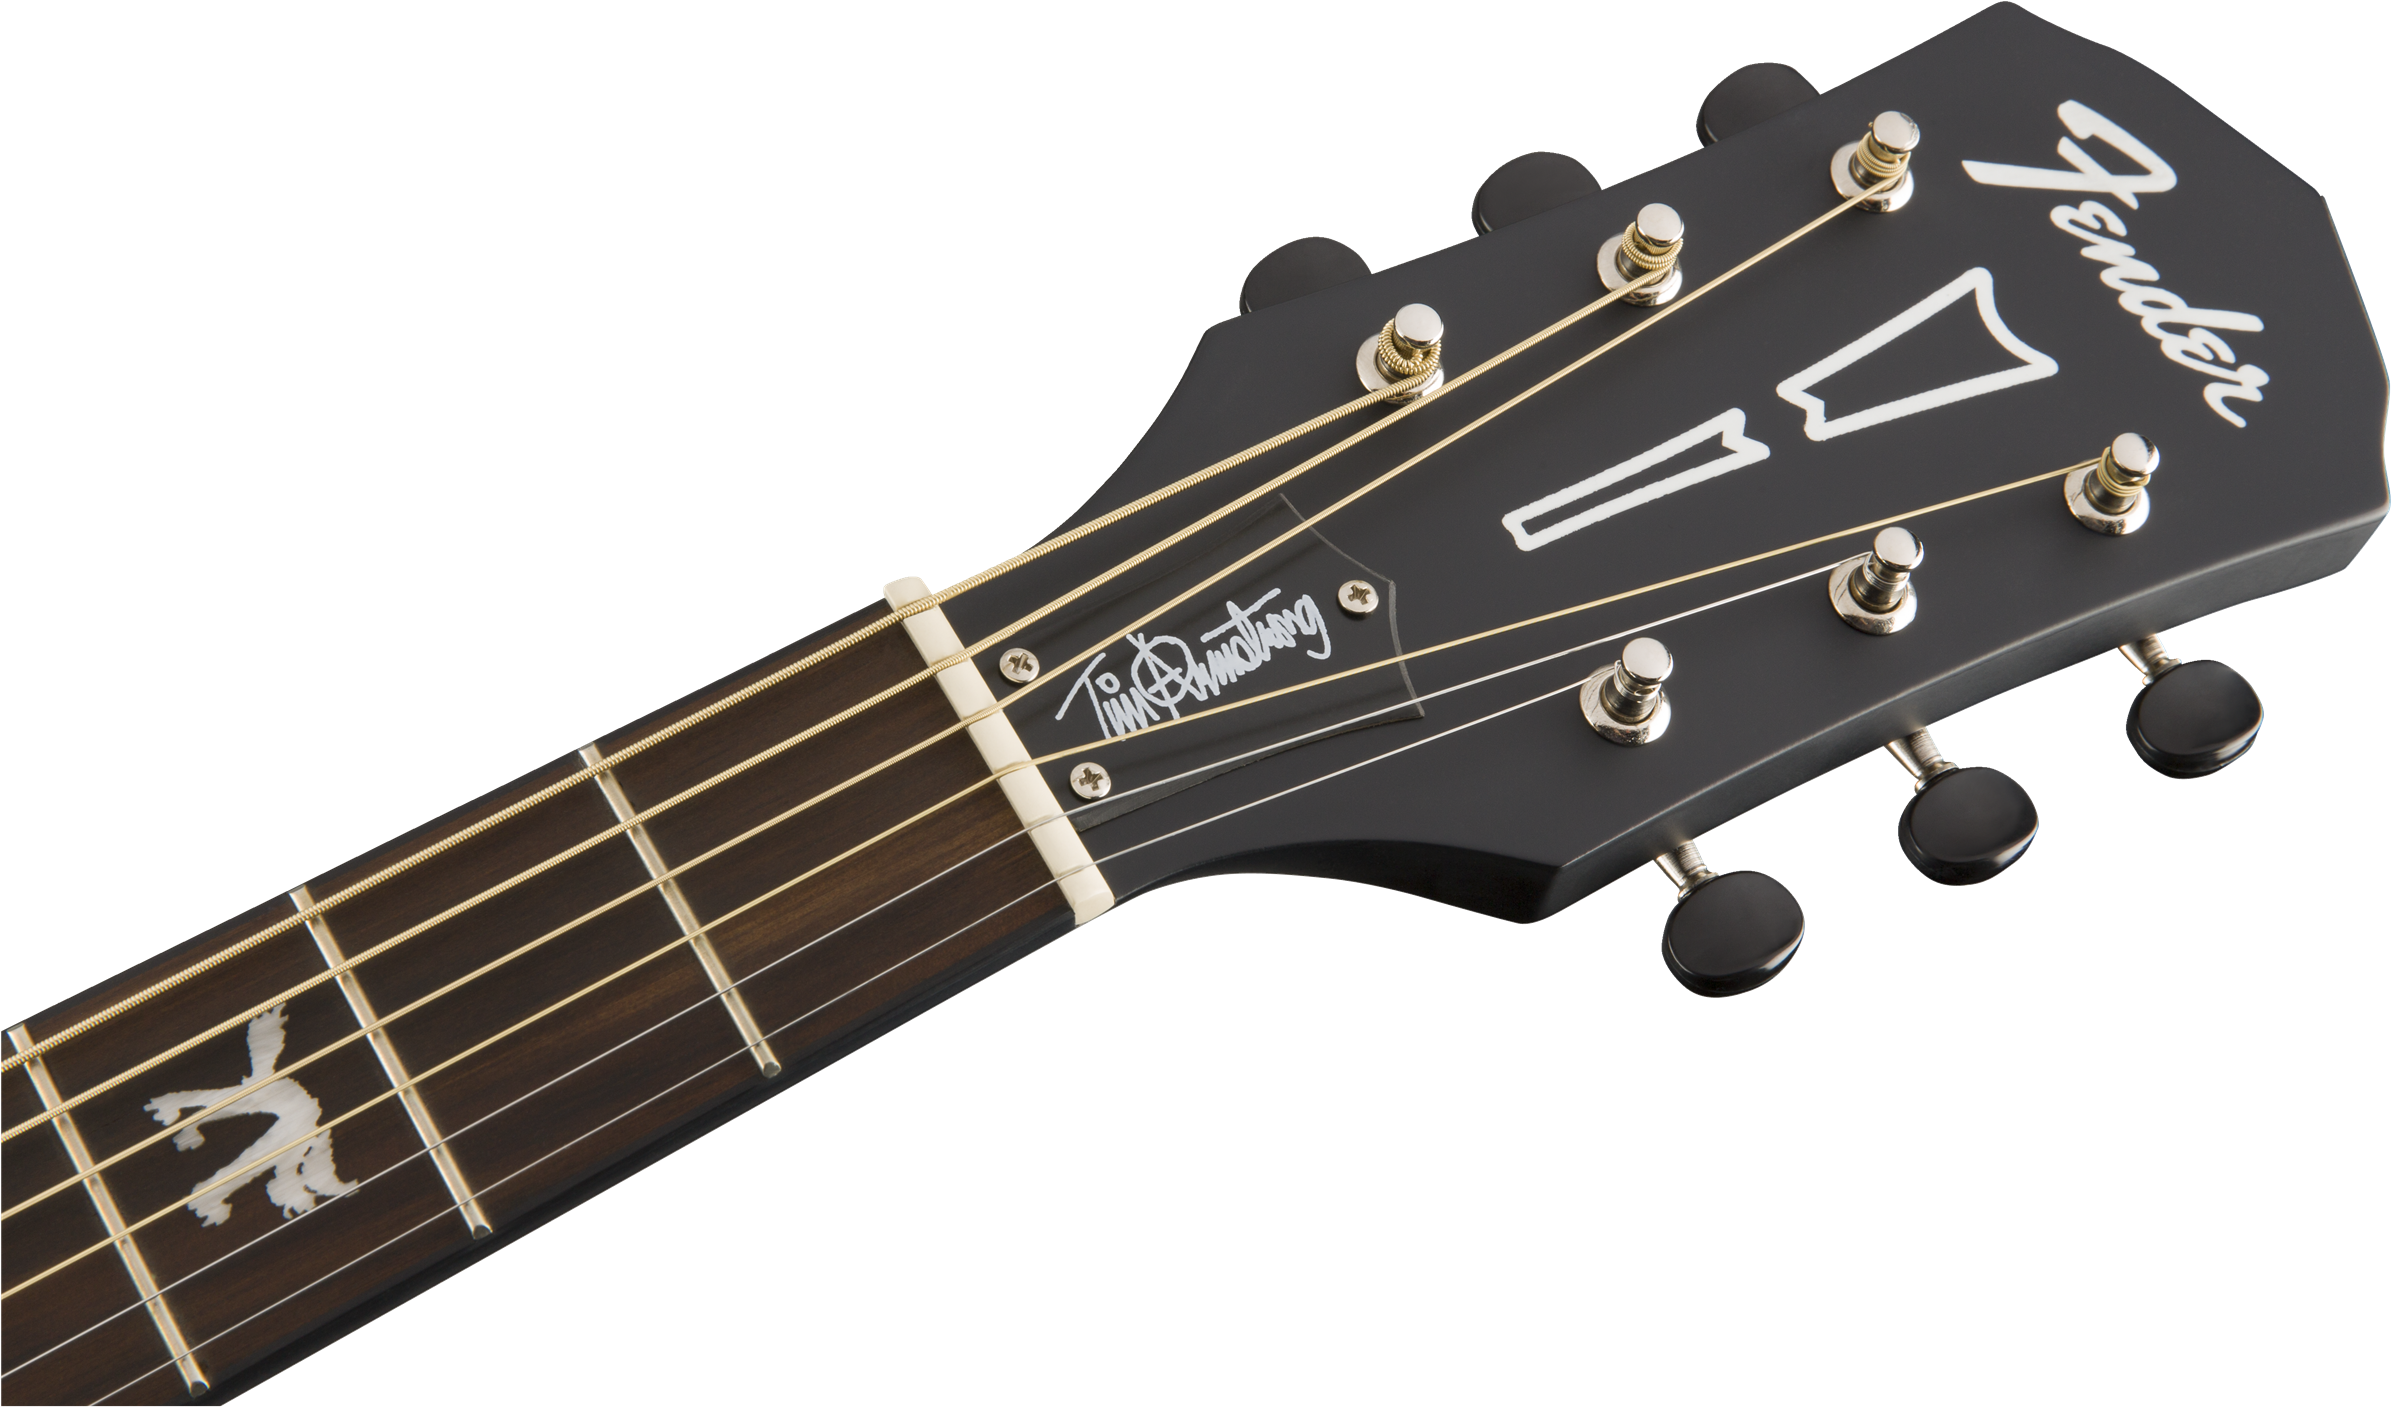 Fender Tim Armstrong Hellcat Epicea Acajou Wal - Checkerboard White/black - Electro acoustic guitar - Variation 4